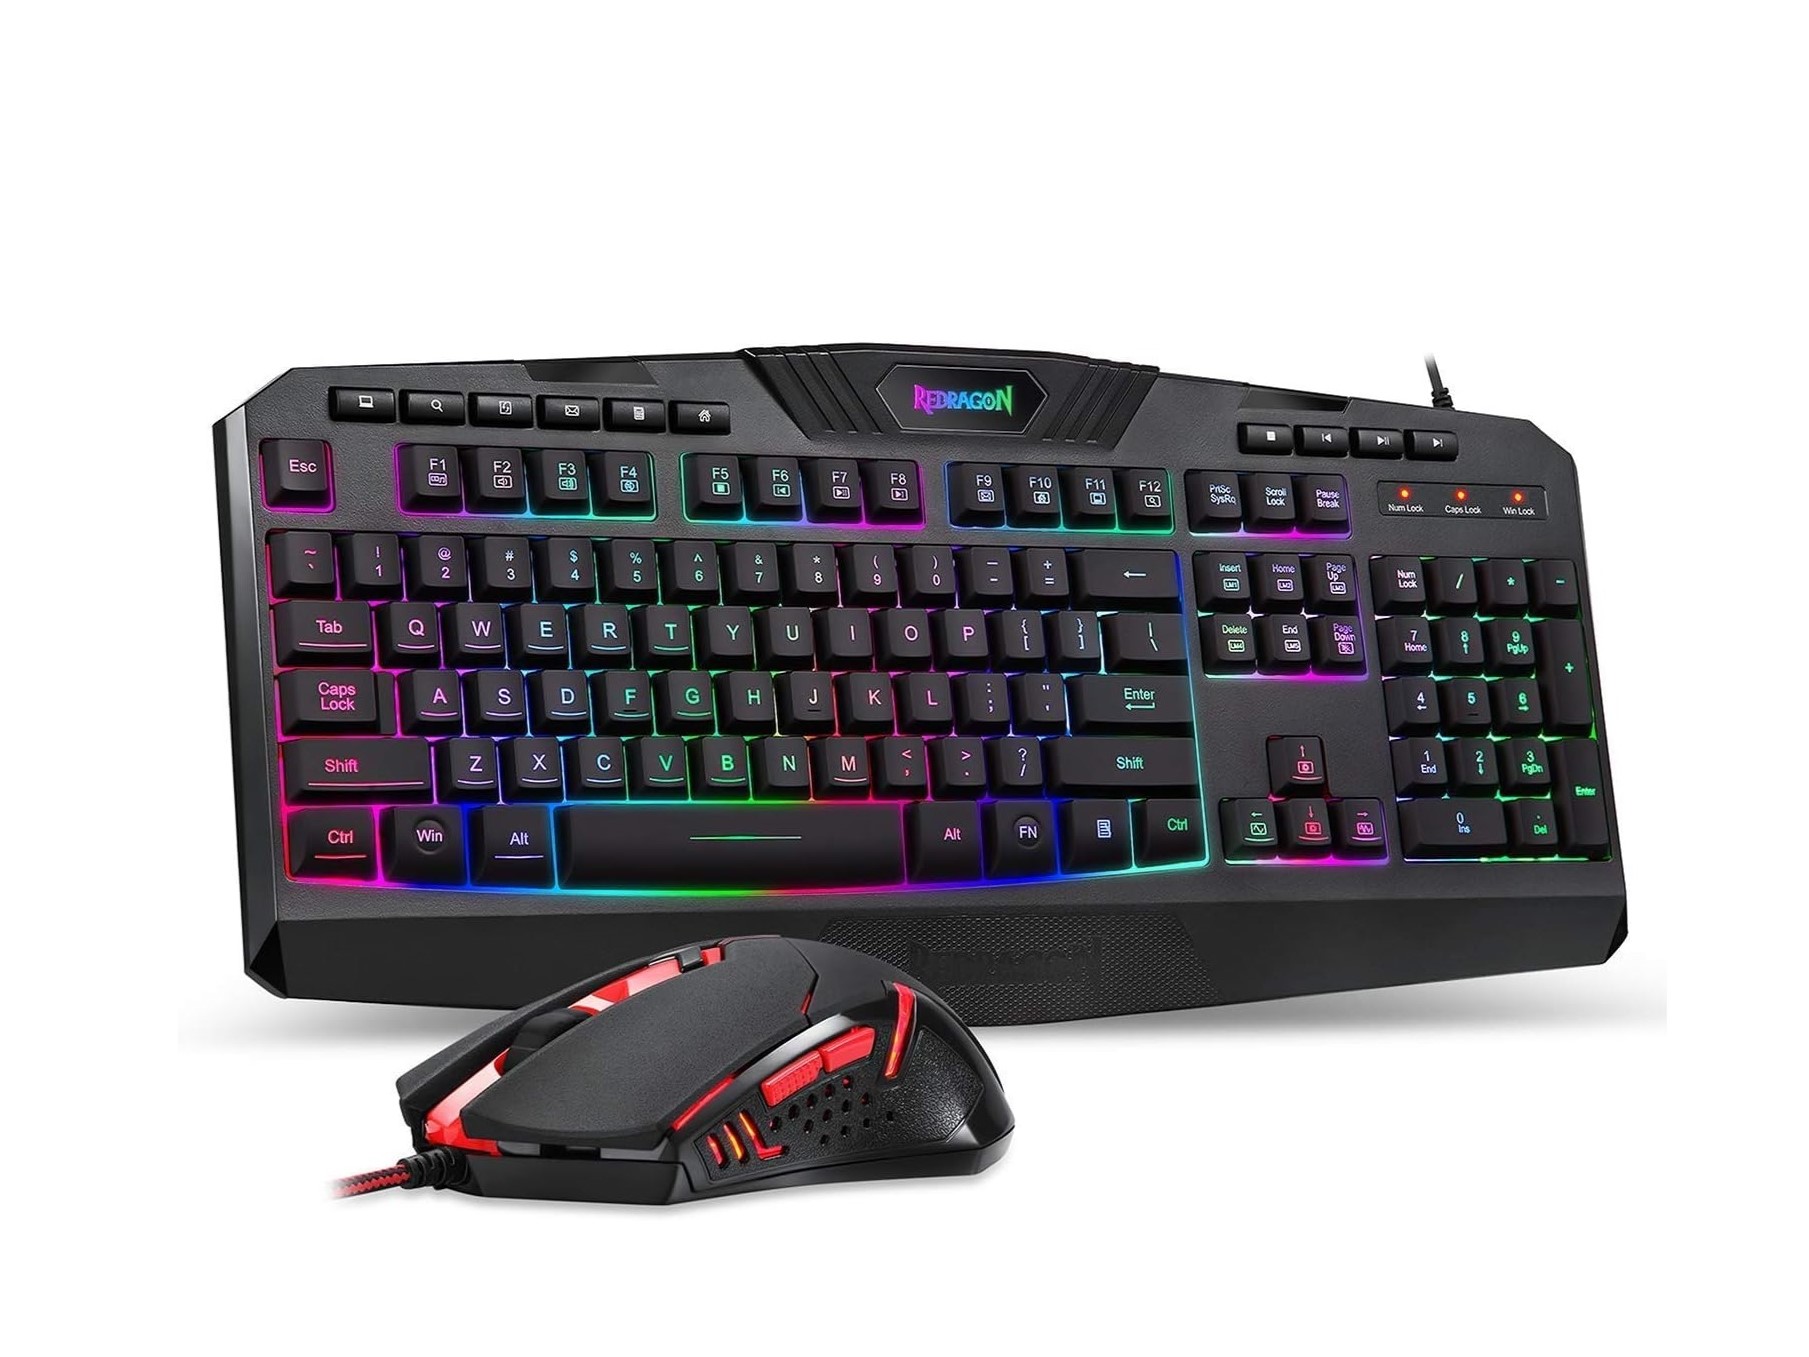 Redragon S101 gaming keyboard and M601 gaming mouse combo gift for PC gamers